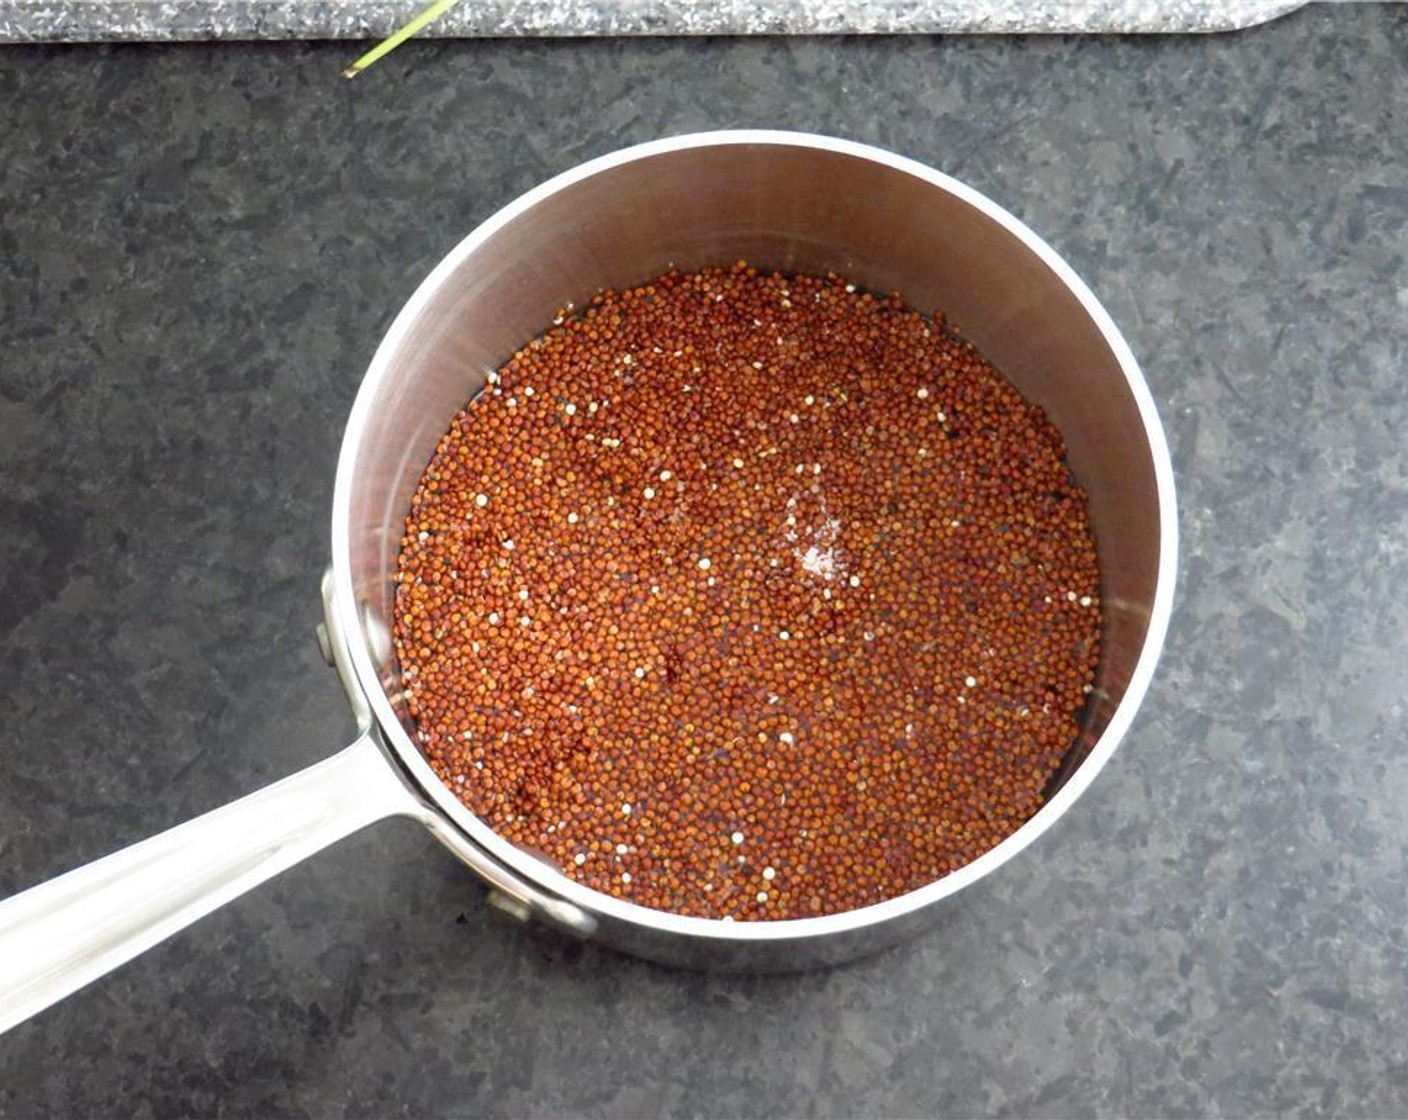 step 2 In a small saucepan, combine Quinoa (1/2 cup) and Water (1 cup) and bring to a boil. Reduce heat to a simmer, cover, and cook for 15 minutes. Remove from heat, and take off lid to allow quinoa to cool.